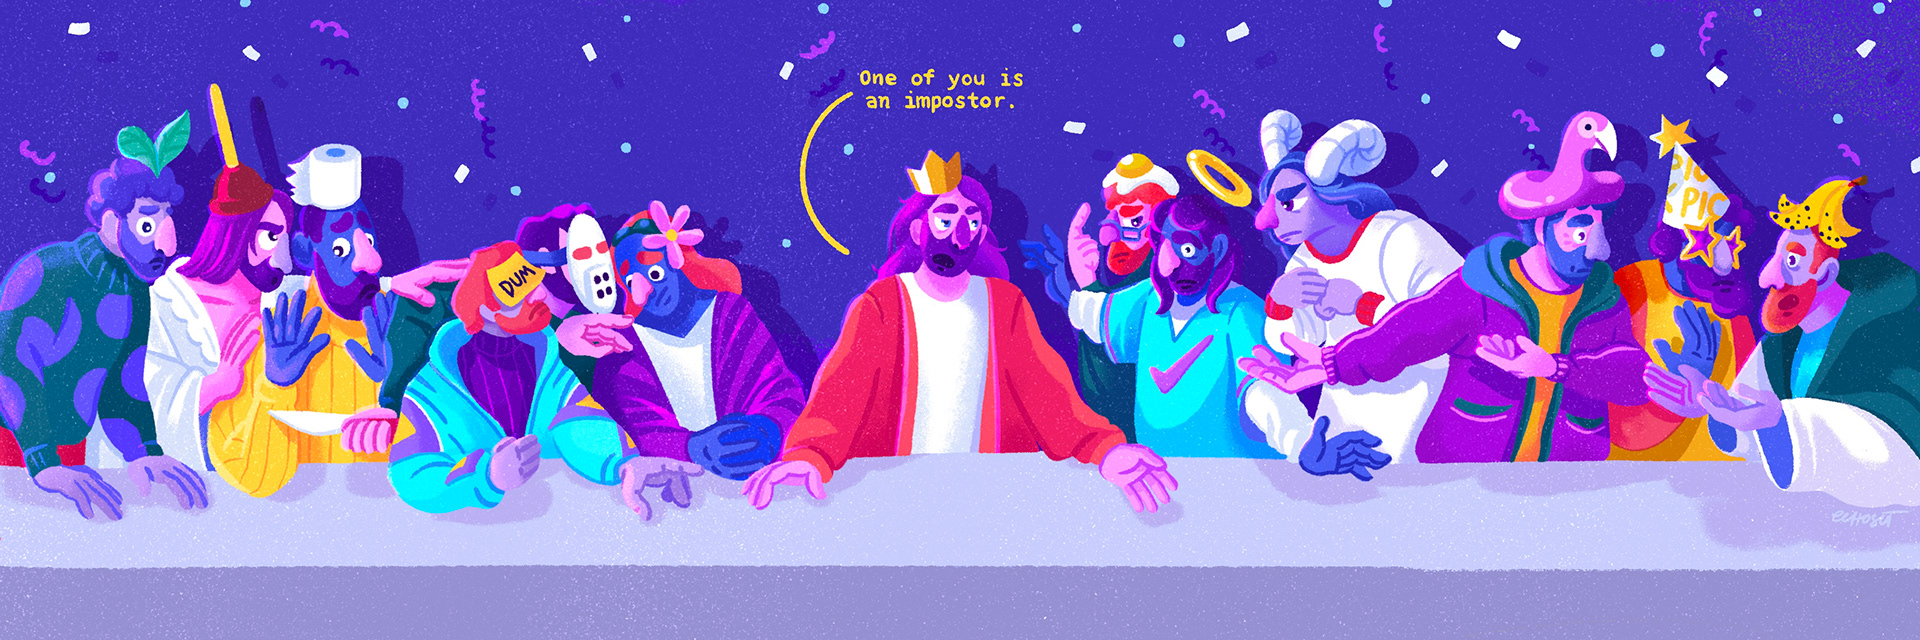 The Last Supper x Among Us | Behance